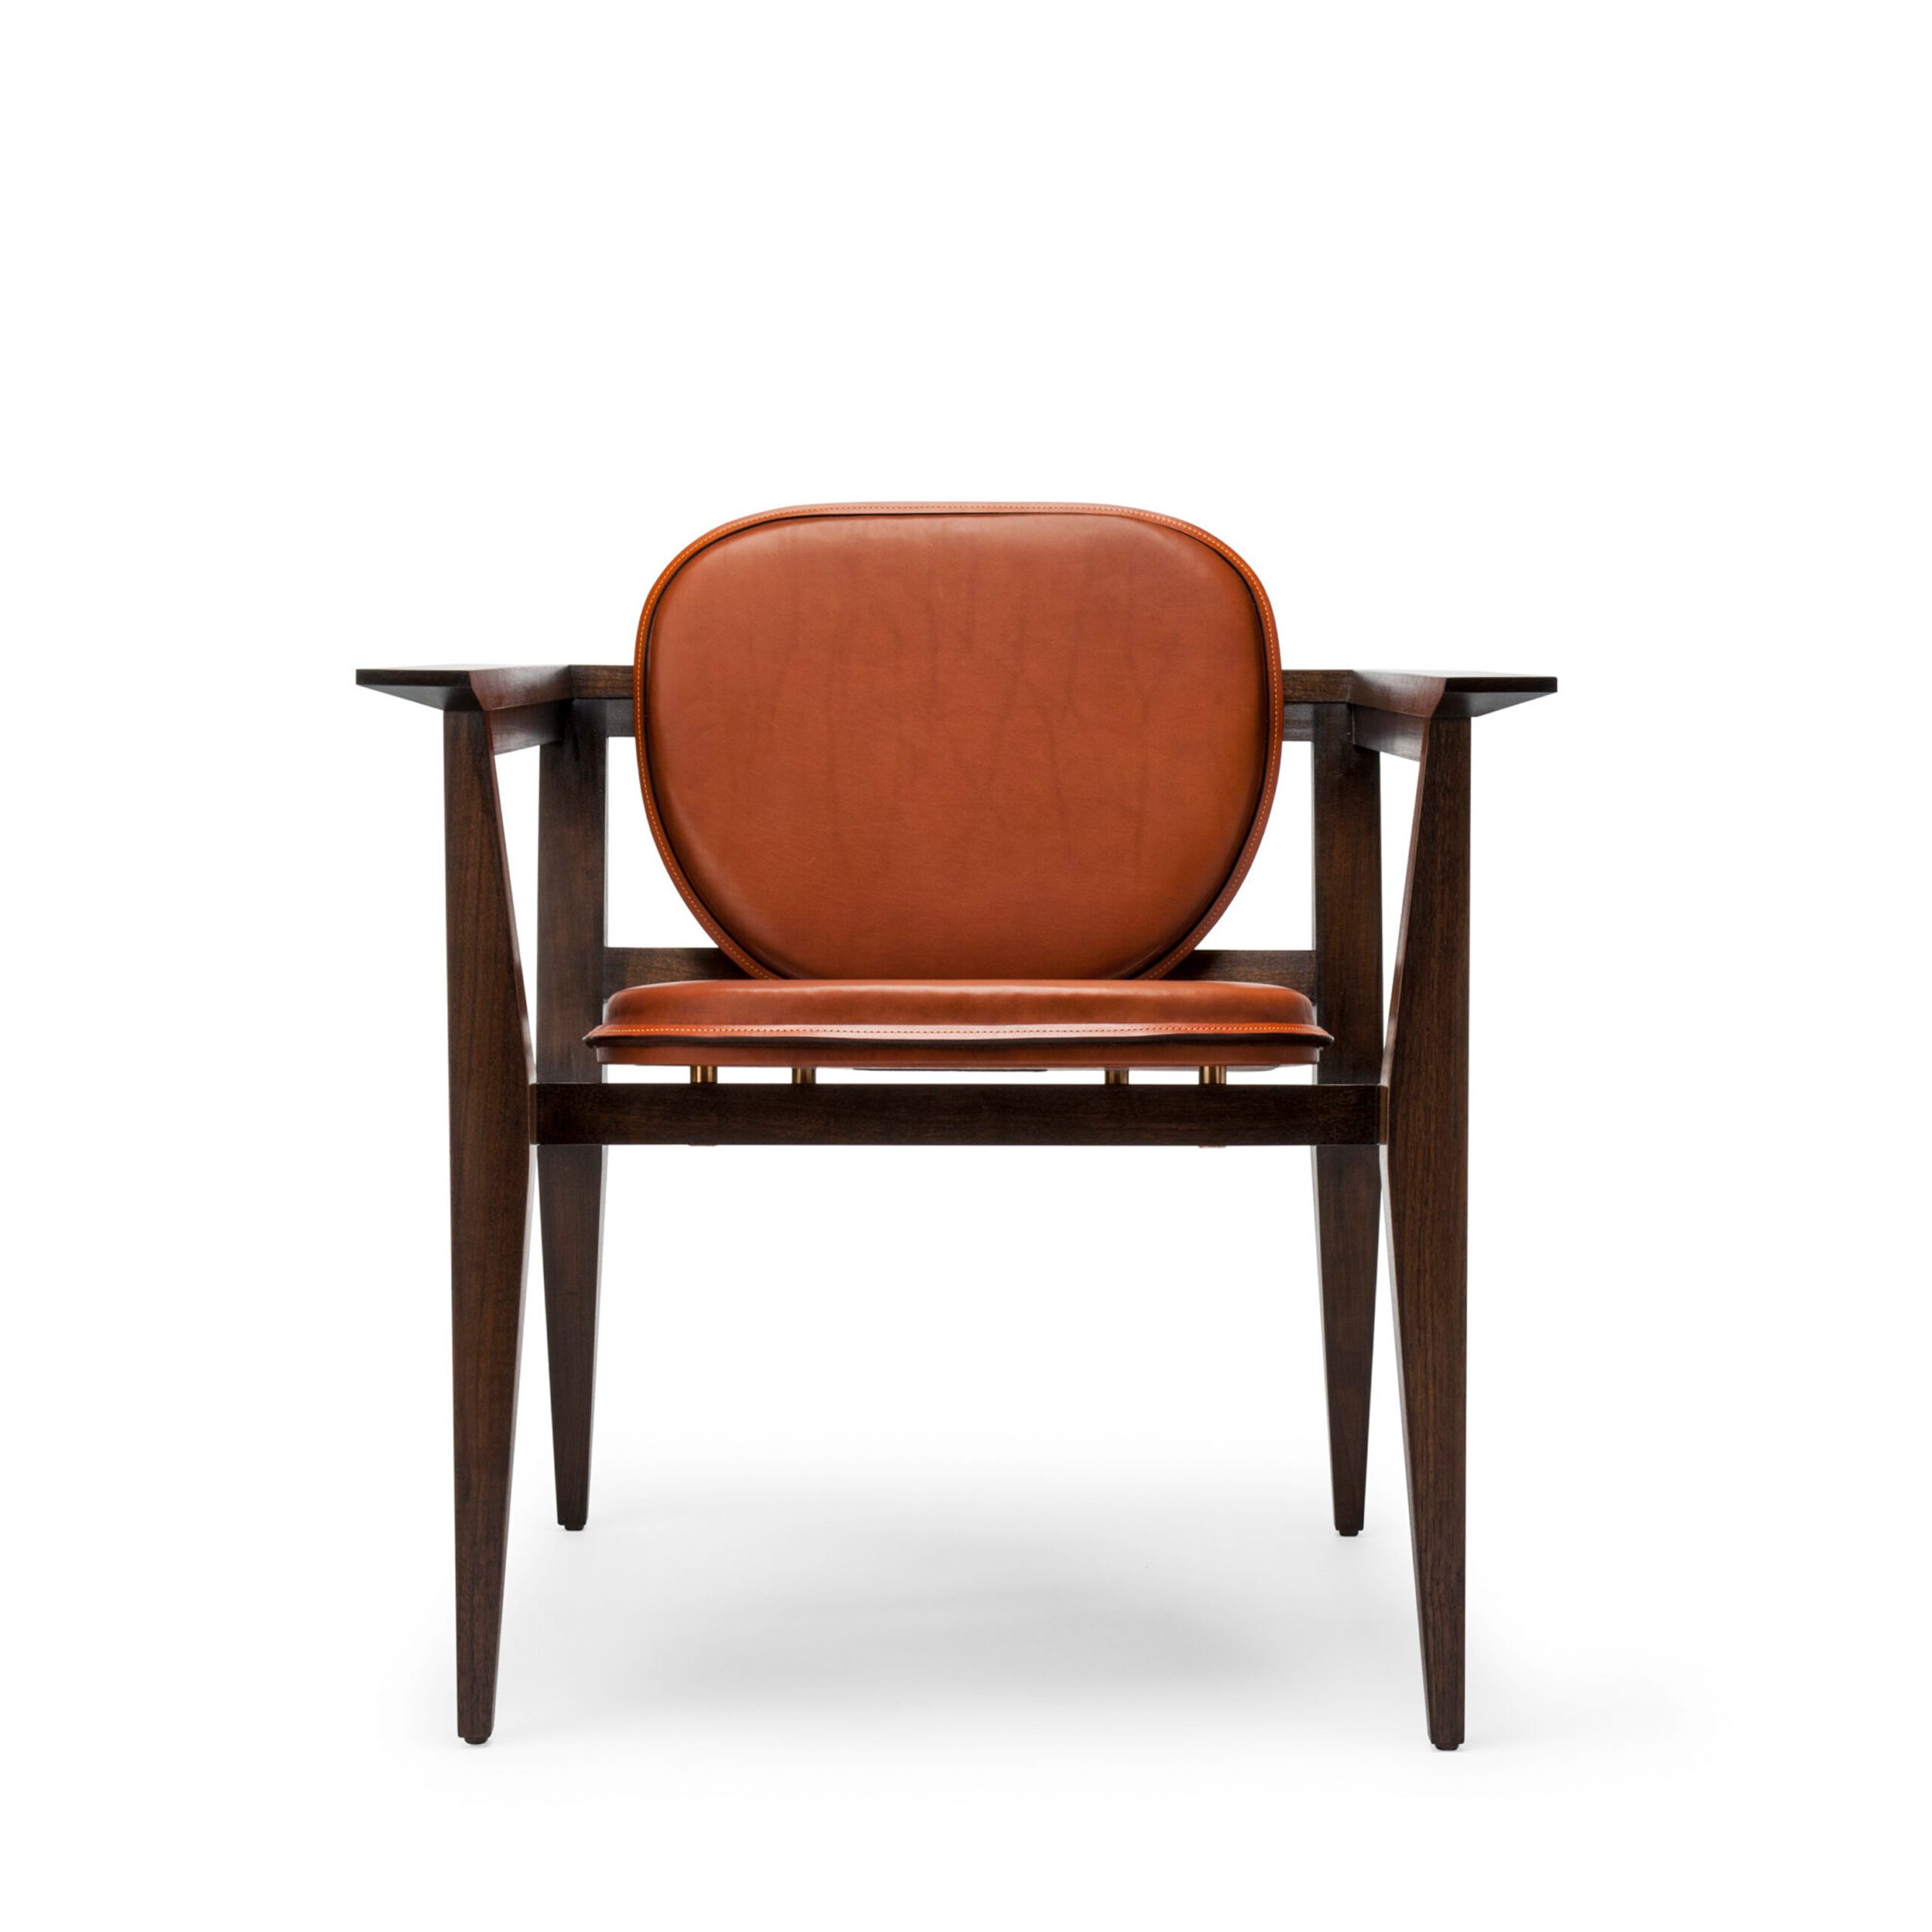 The Constructor Chair - part of the Stuart Scott Saddlery collection